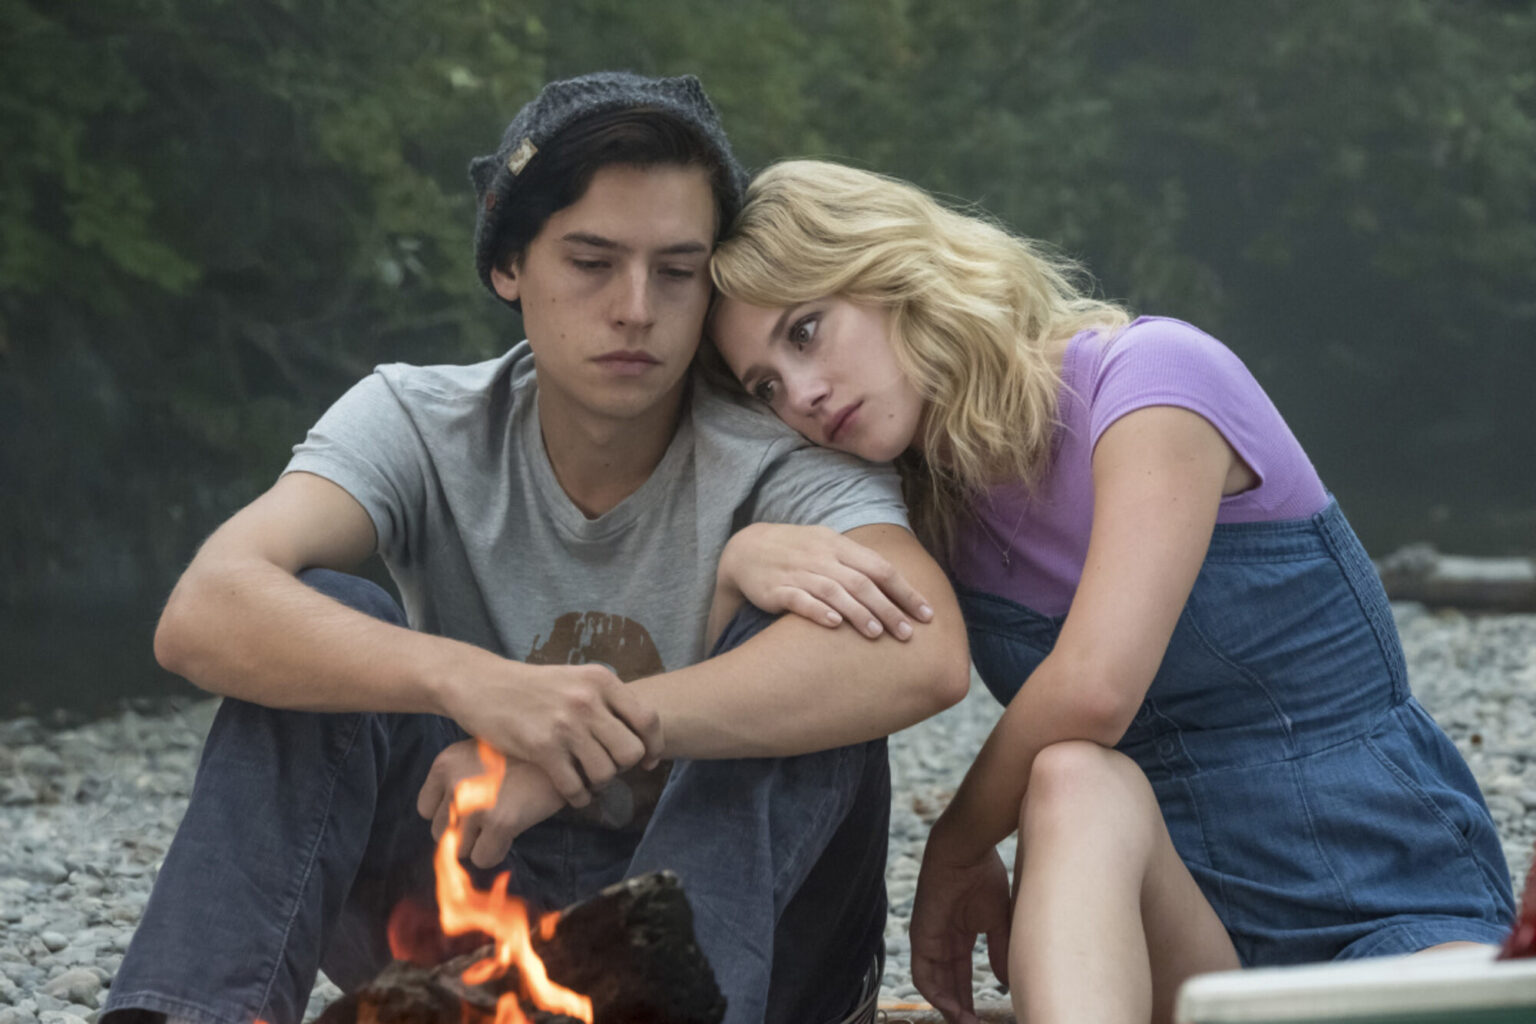 Jughead has returned to the town of Riverdale! Have you been missing Bughead? Let's take a look at Jughead & Betty's most adorable moments together.